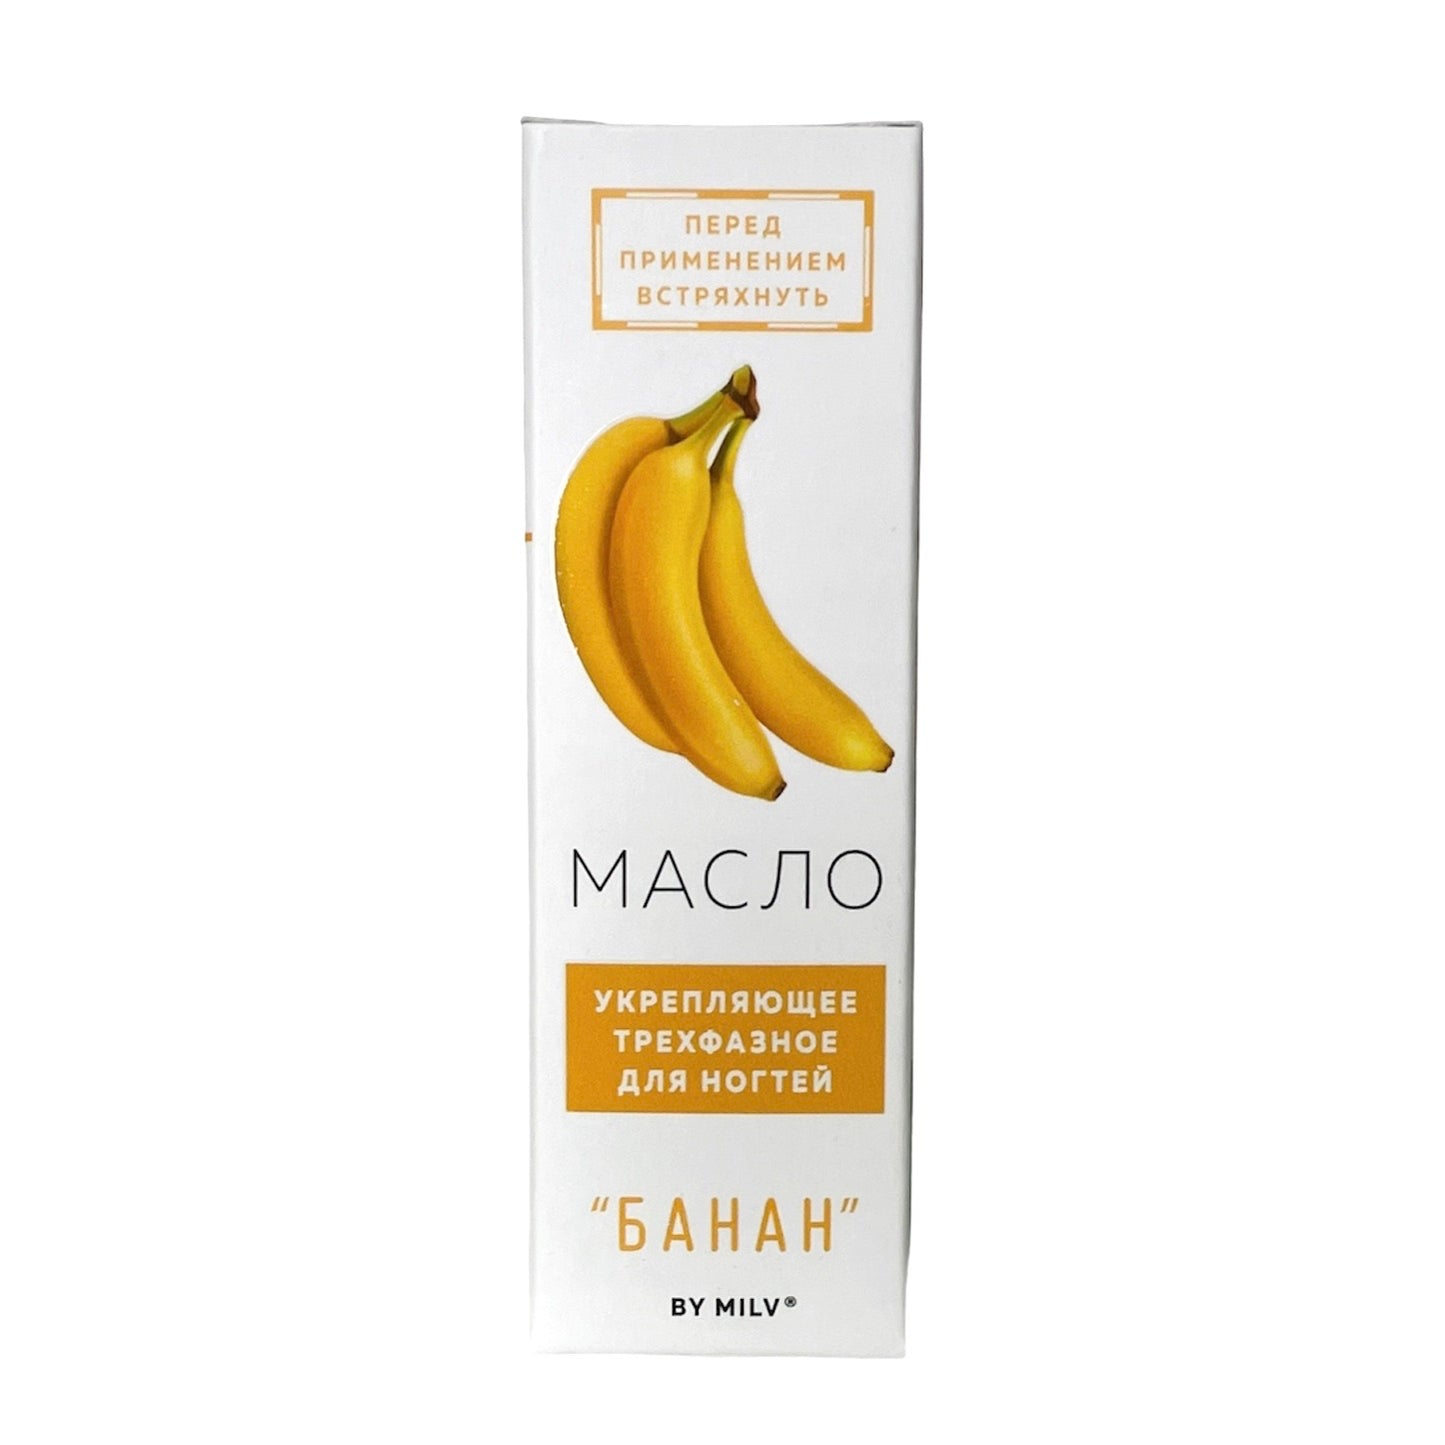 Three-phase oil for strengthening and growing nails, BANANA